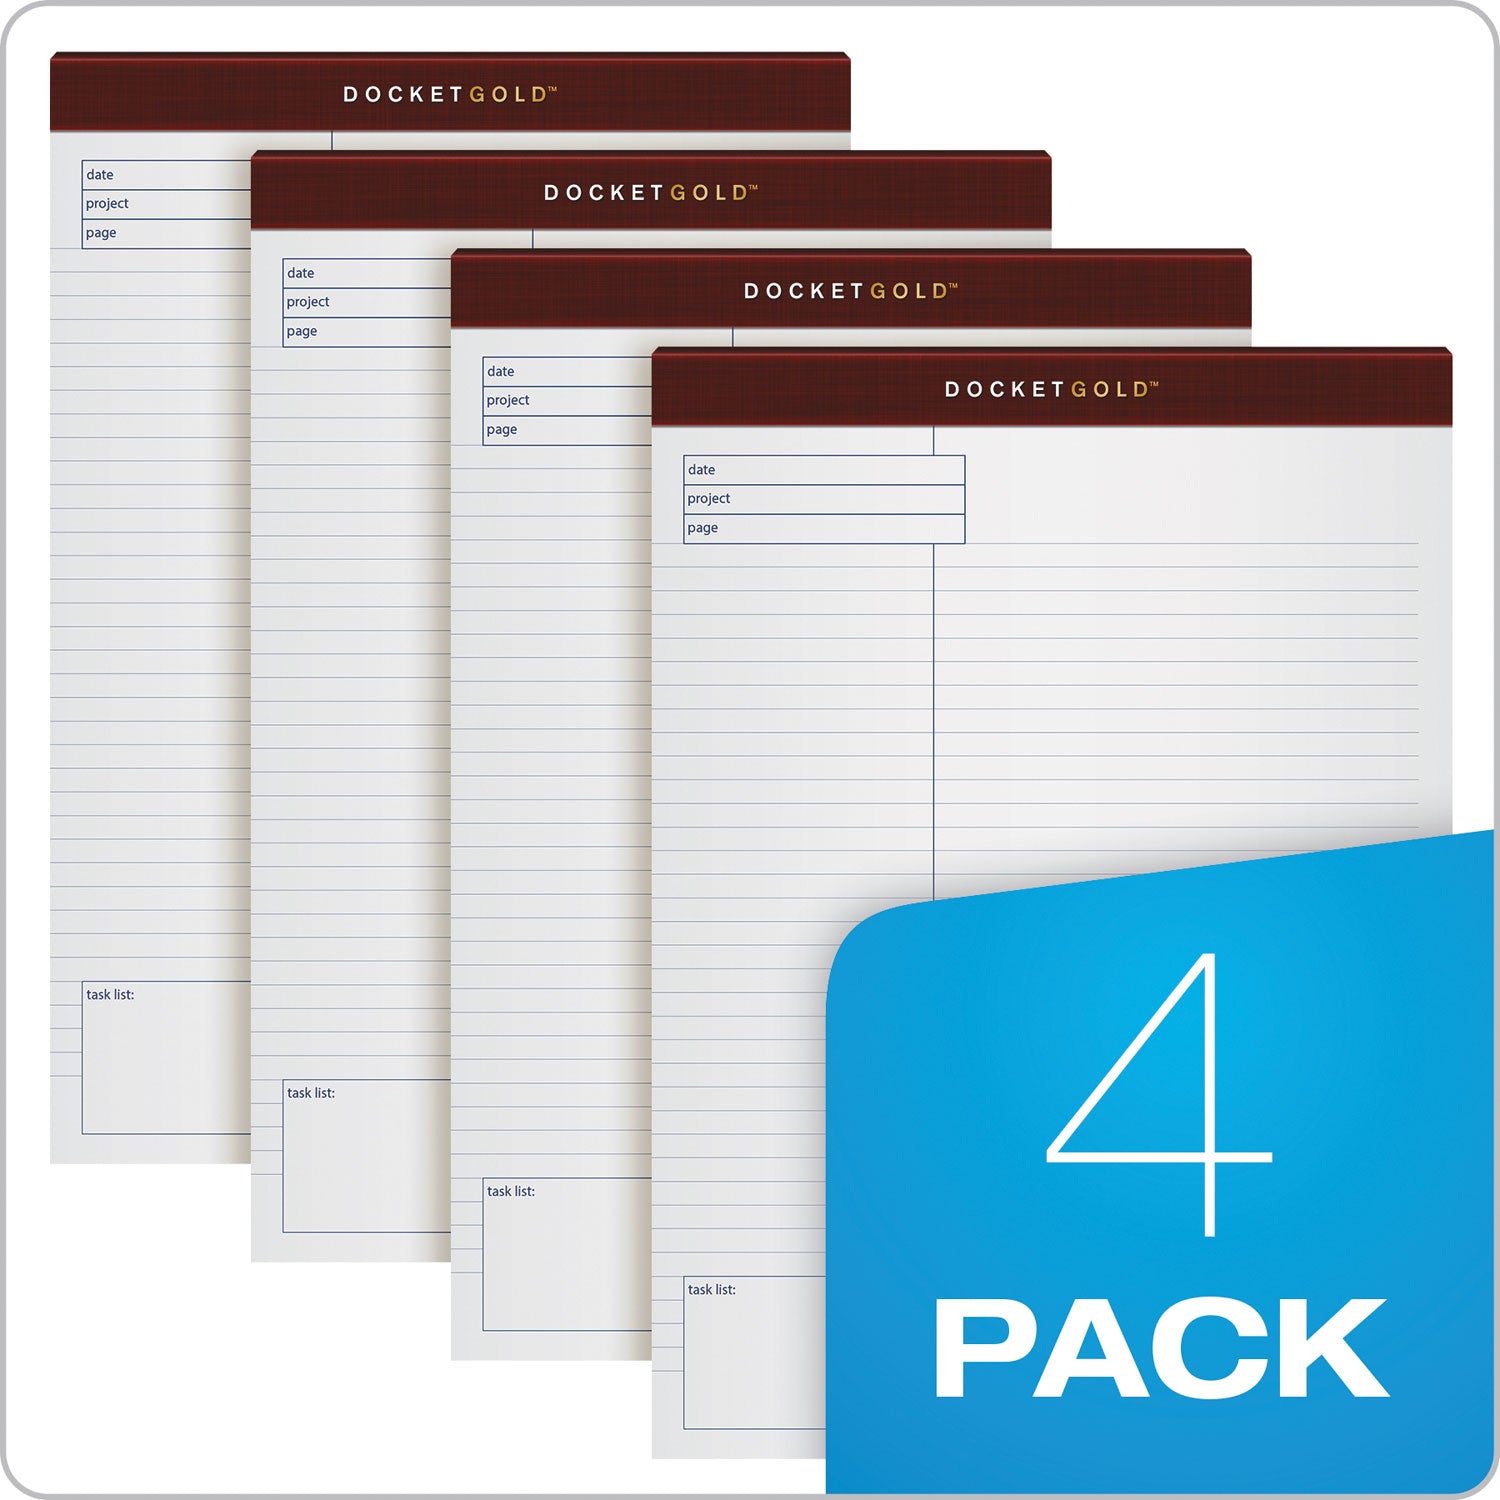 Docket Gold Planning Pads, Project-Management Format, Quadrille Rule (4 sq/in), 40 White 8.5 x 11.75 Sheets, 4/Pack - 